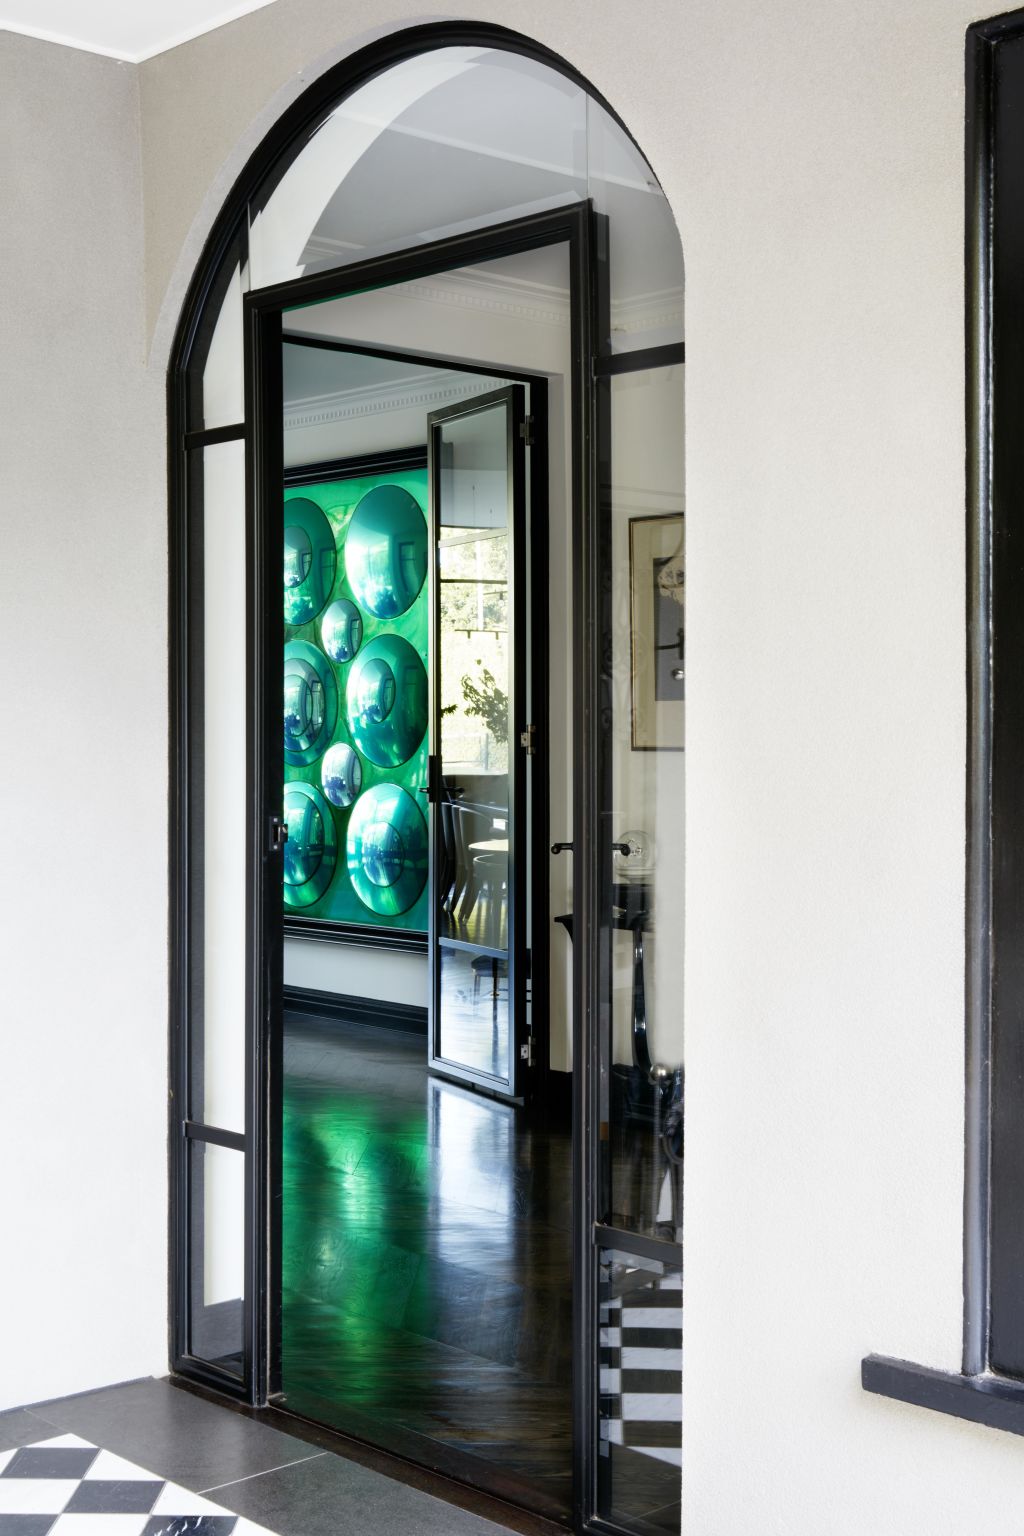 The entry-way into the home. Photo: Elisa Watson